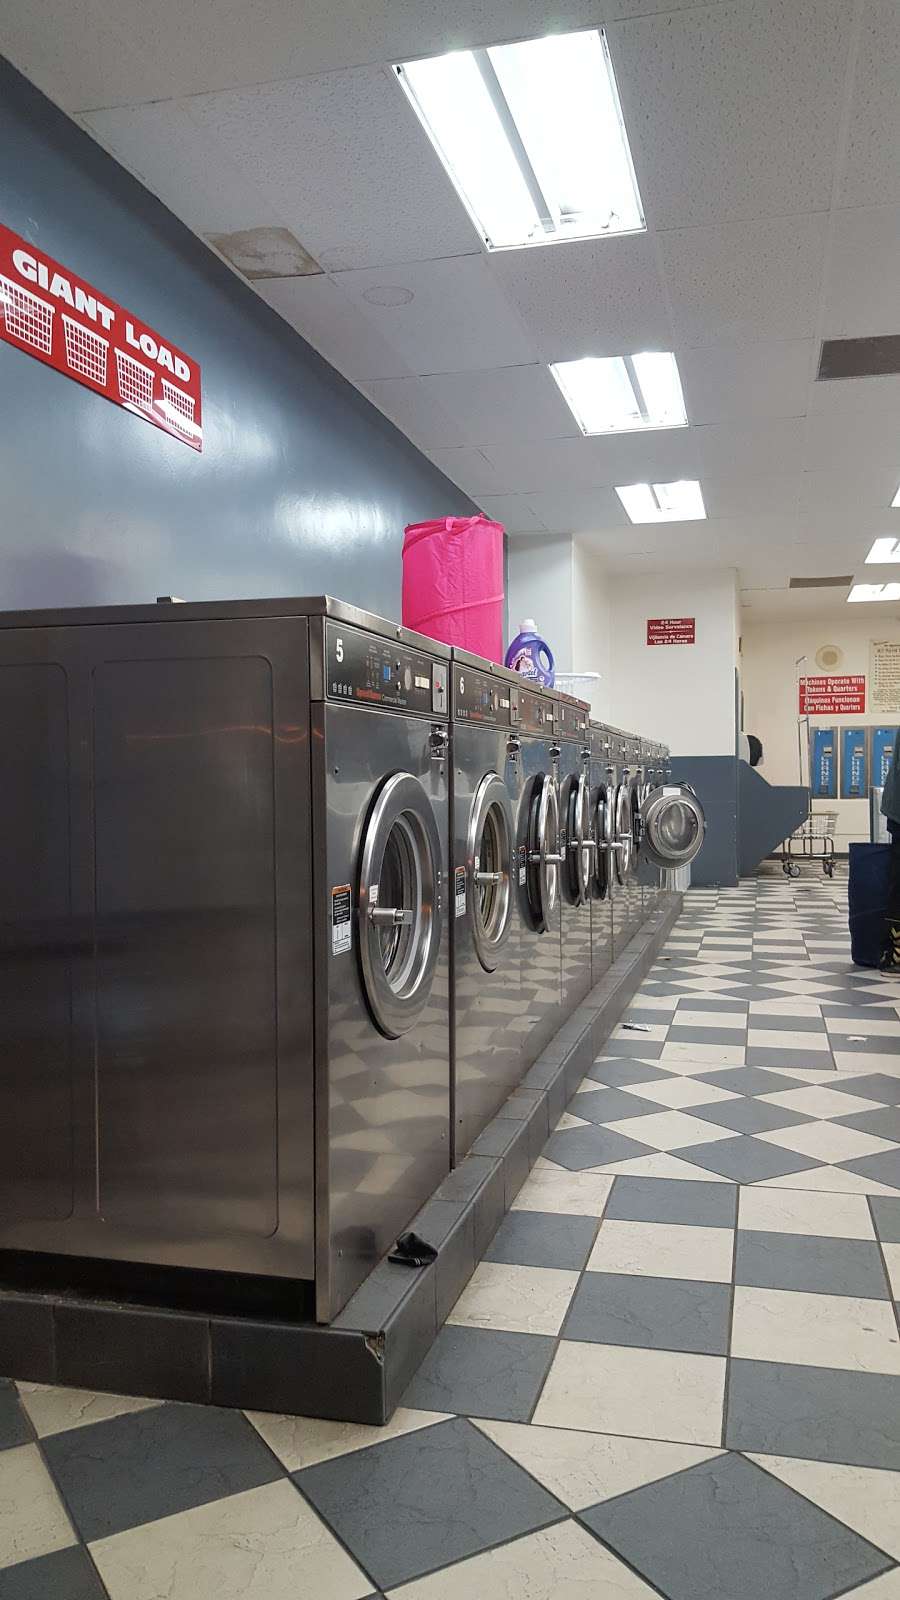 Mr Bubbles 24 Hour Laundry - laundry  | Photo 4 of 10 | Address: 1360 S Mission Rd, Fallbrook, CA 92028, USA | Phone: (760) 731-9767